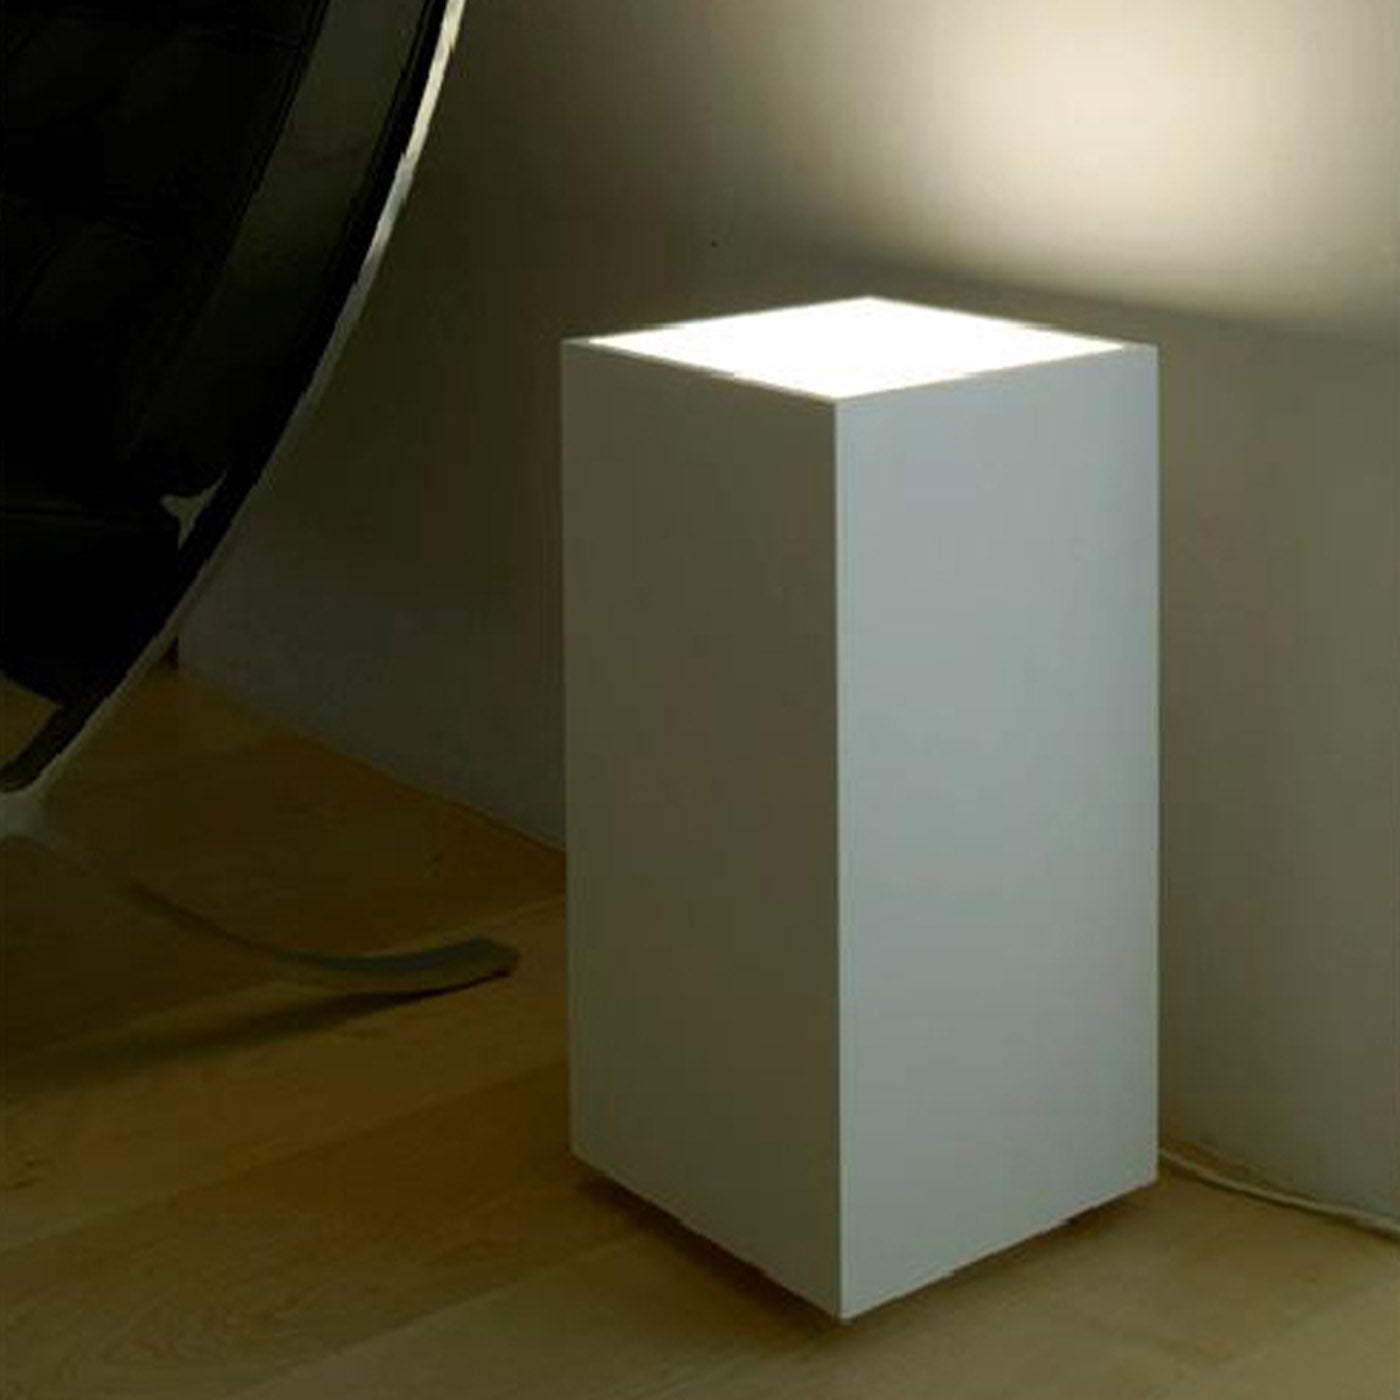 Light Gallery Luxury Cubo 400 White Floor Lamp by Marco Pollice - Alternative view 3